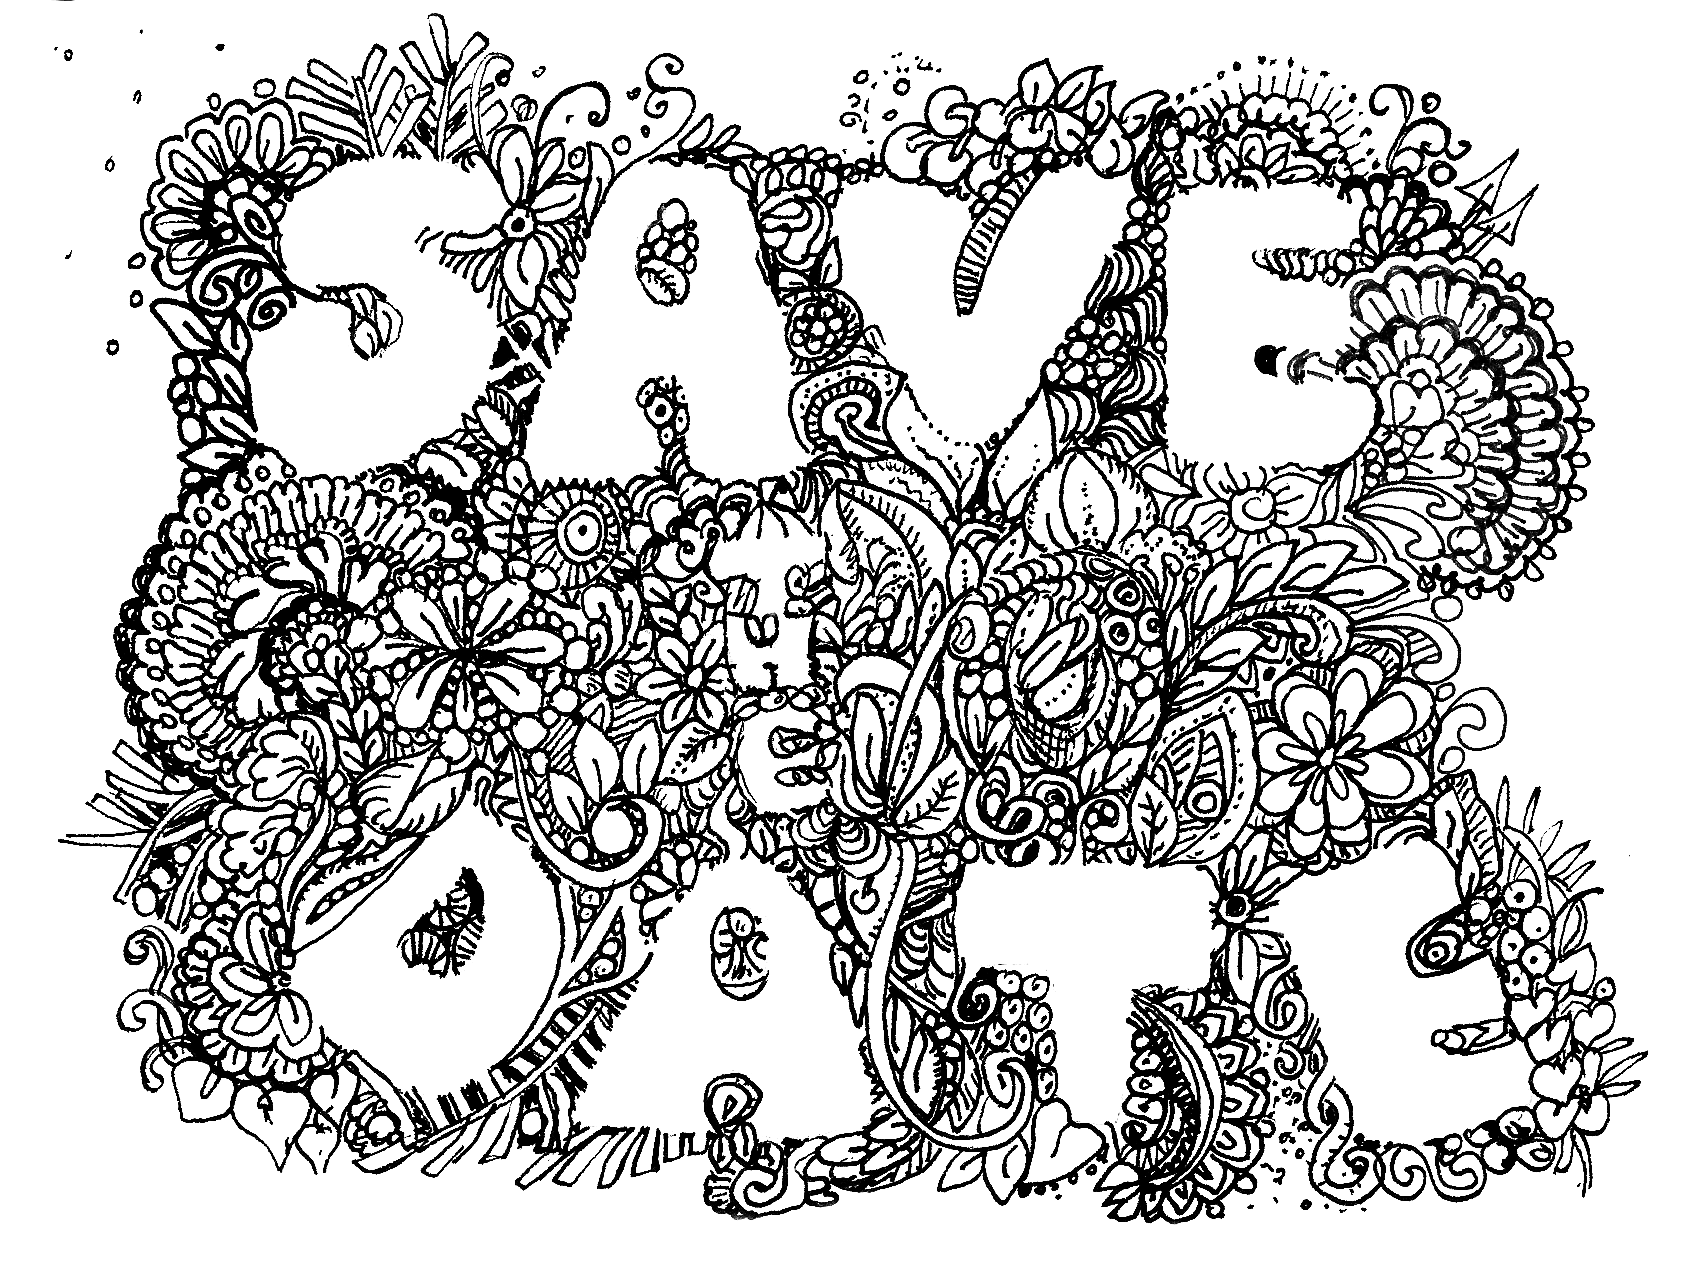 Doodle Karte Save-the-date